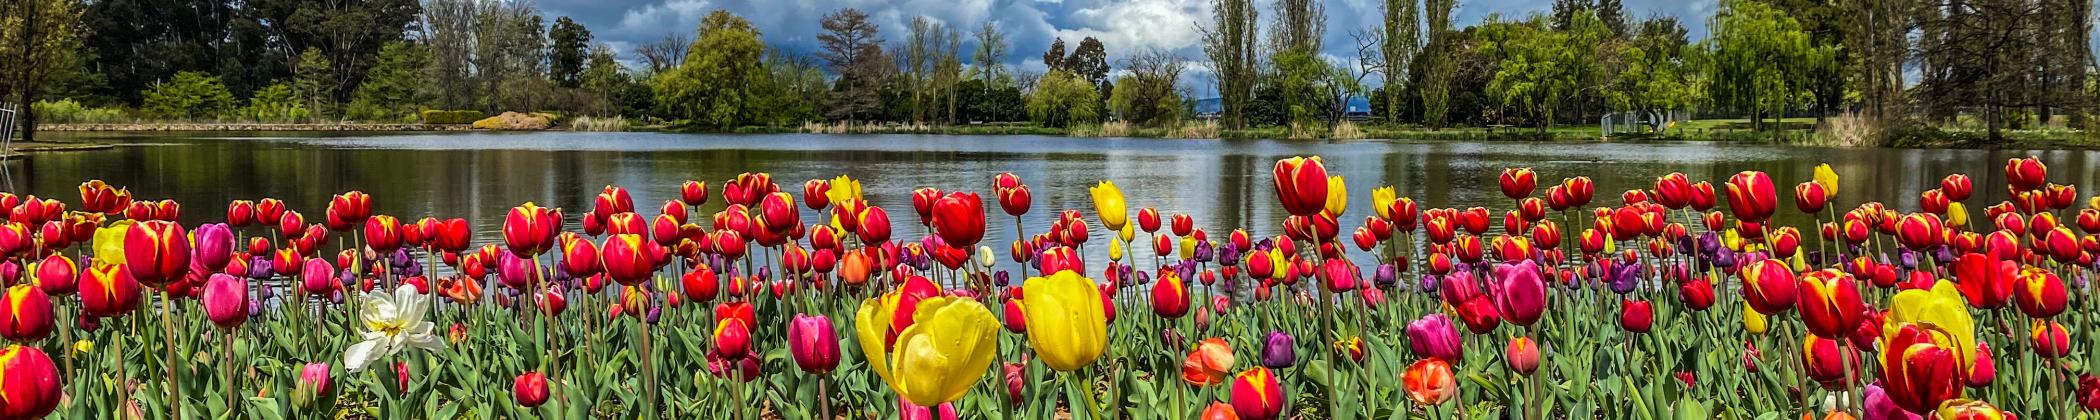 A very colourful image of tulips and a view of the lake in the background taken from Floriade which is the spring flower show in Canberra. Photo by Lauren Sutherland.